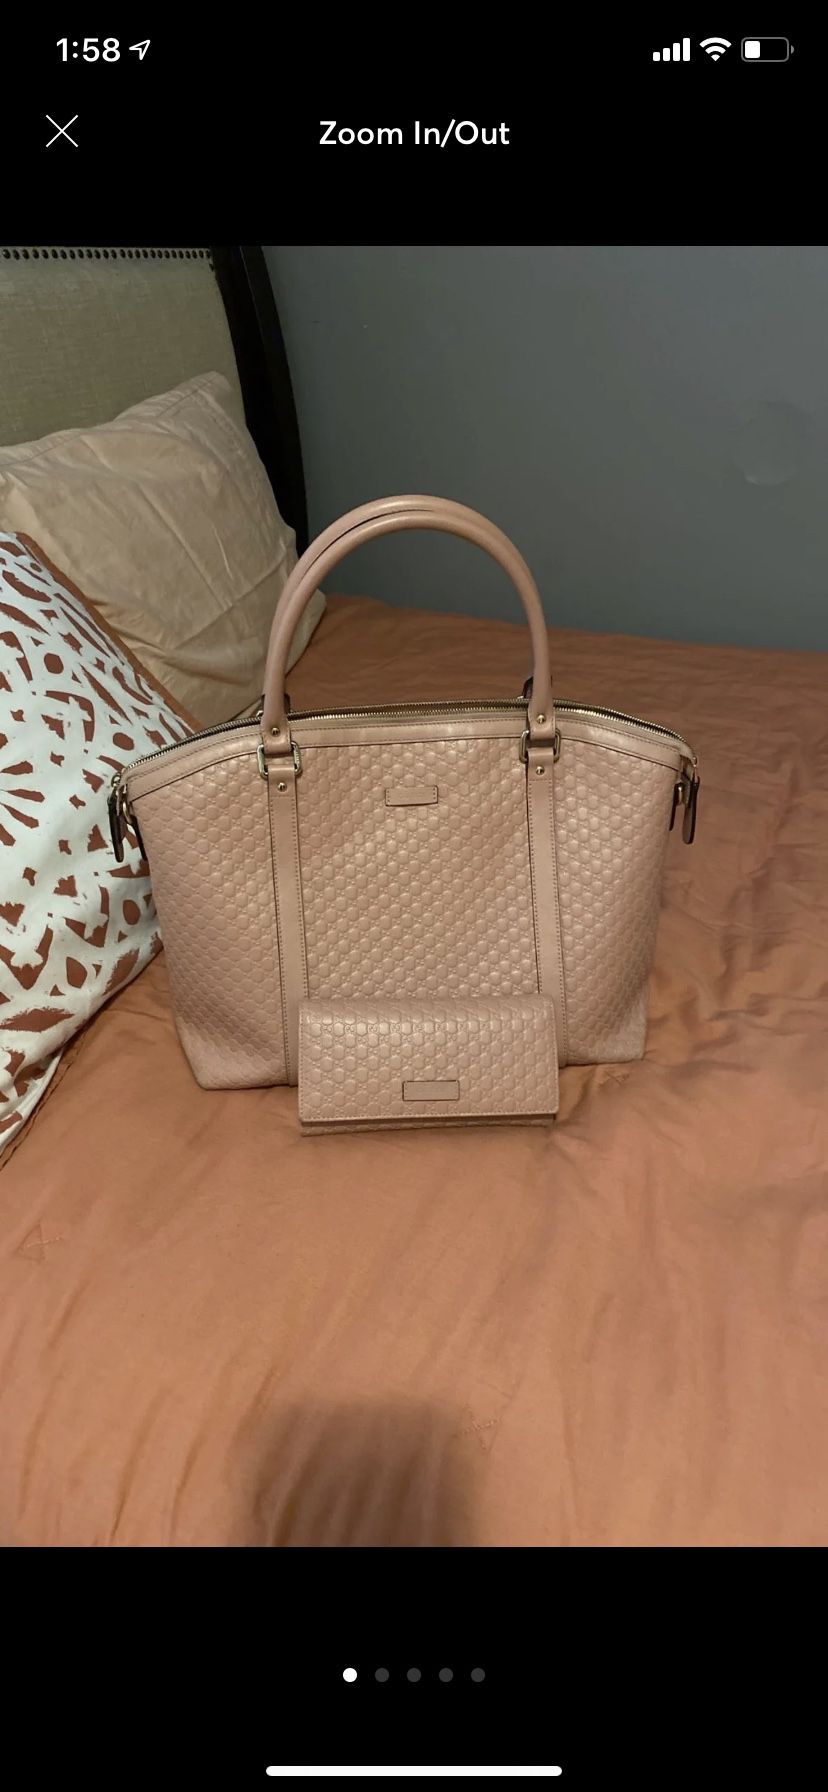 Authentic Gucci purse with matching wallet